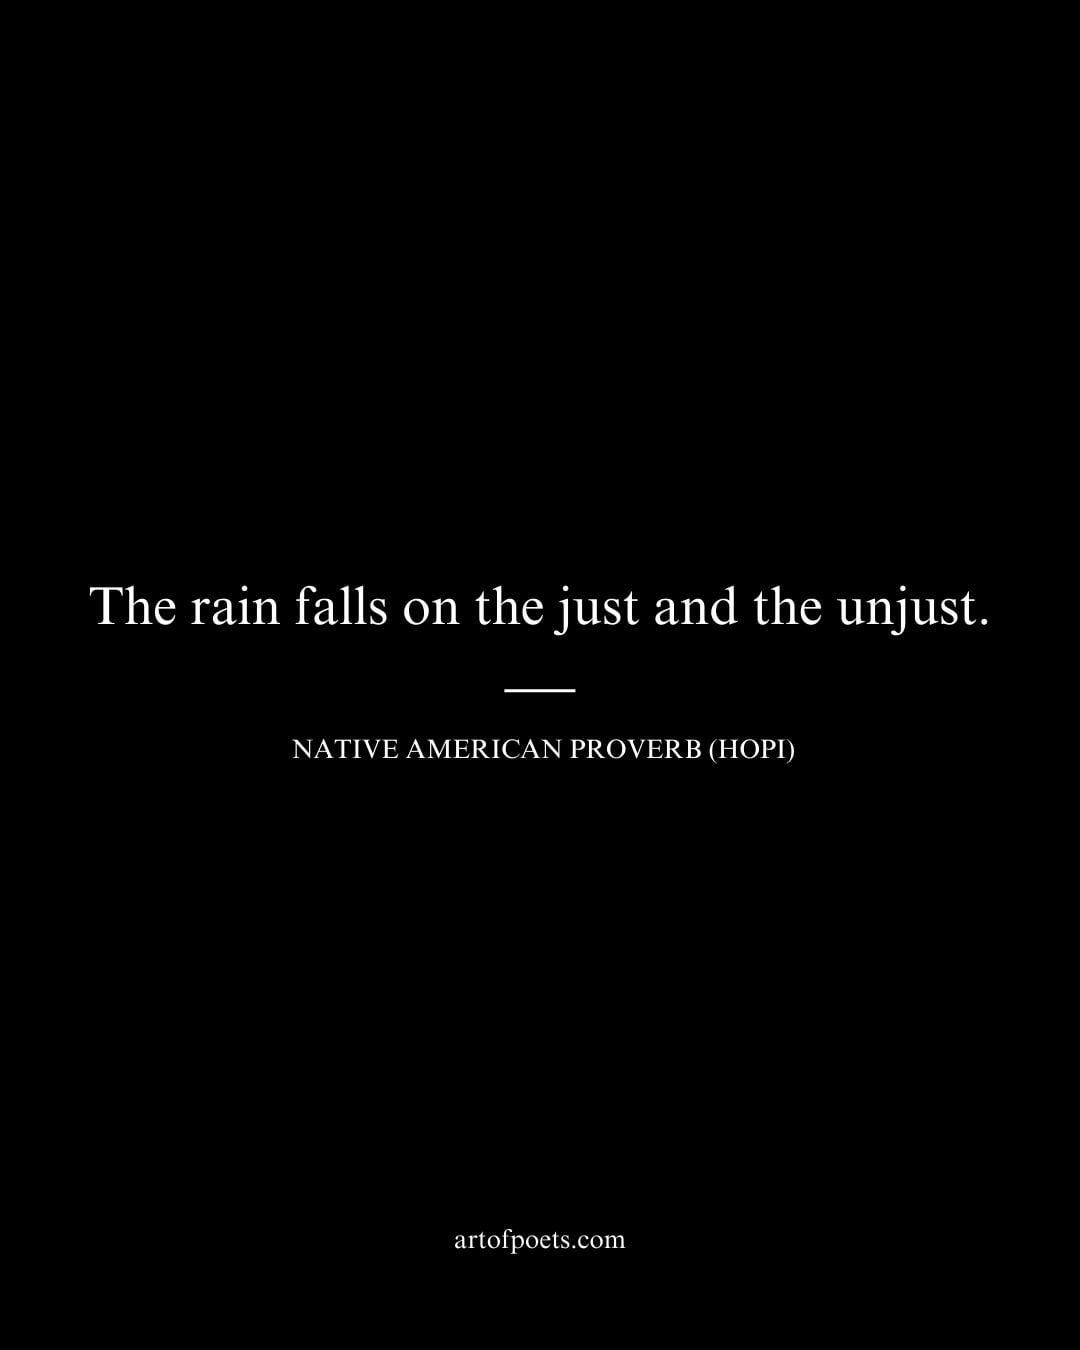 The rain falls on the just and the unjust